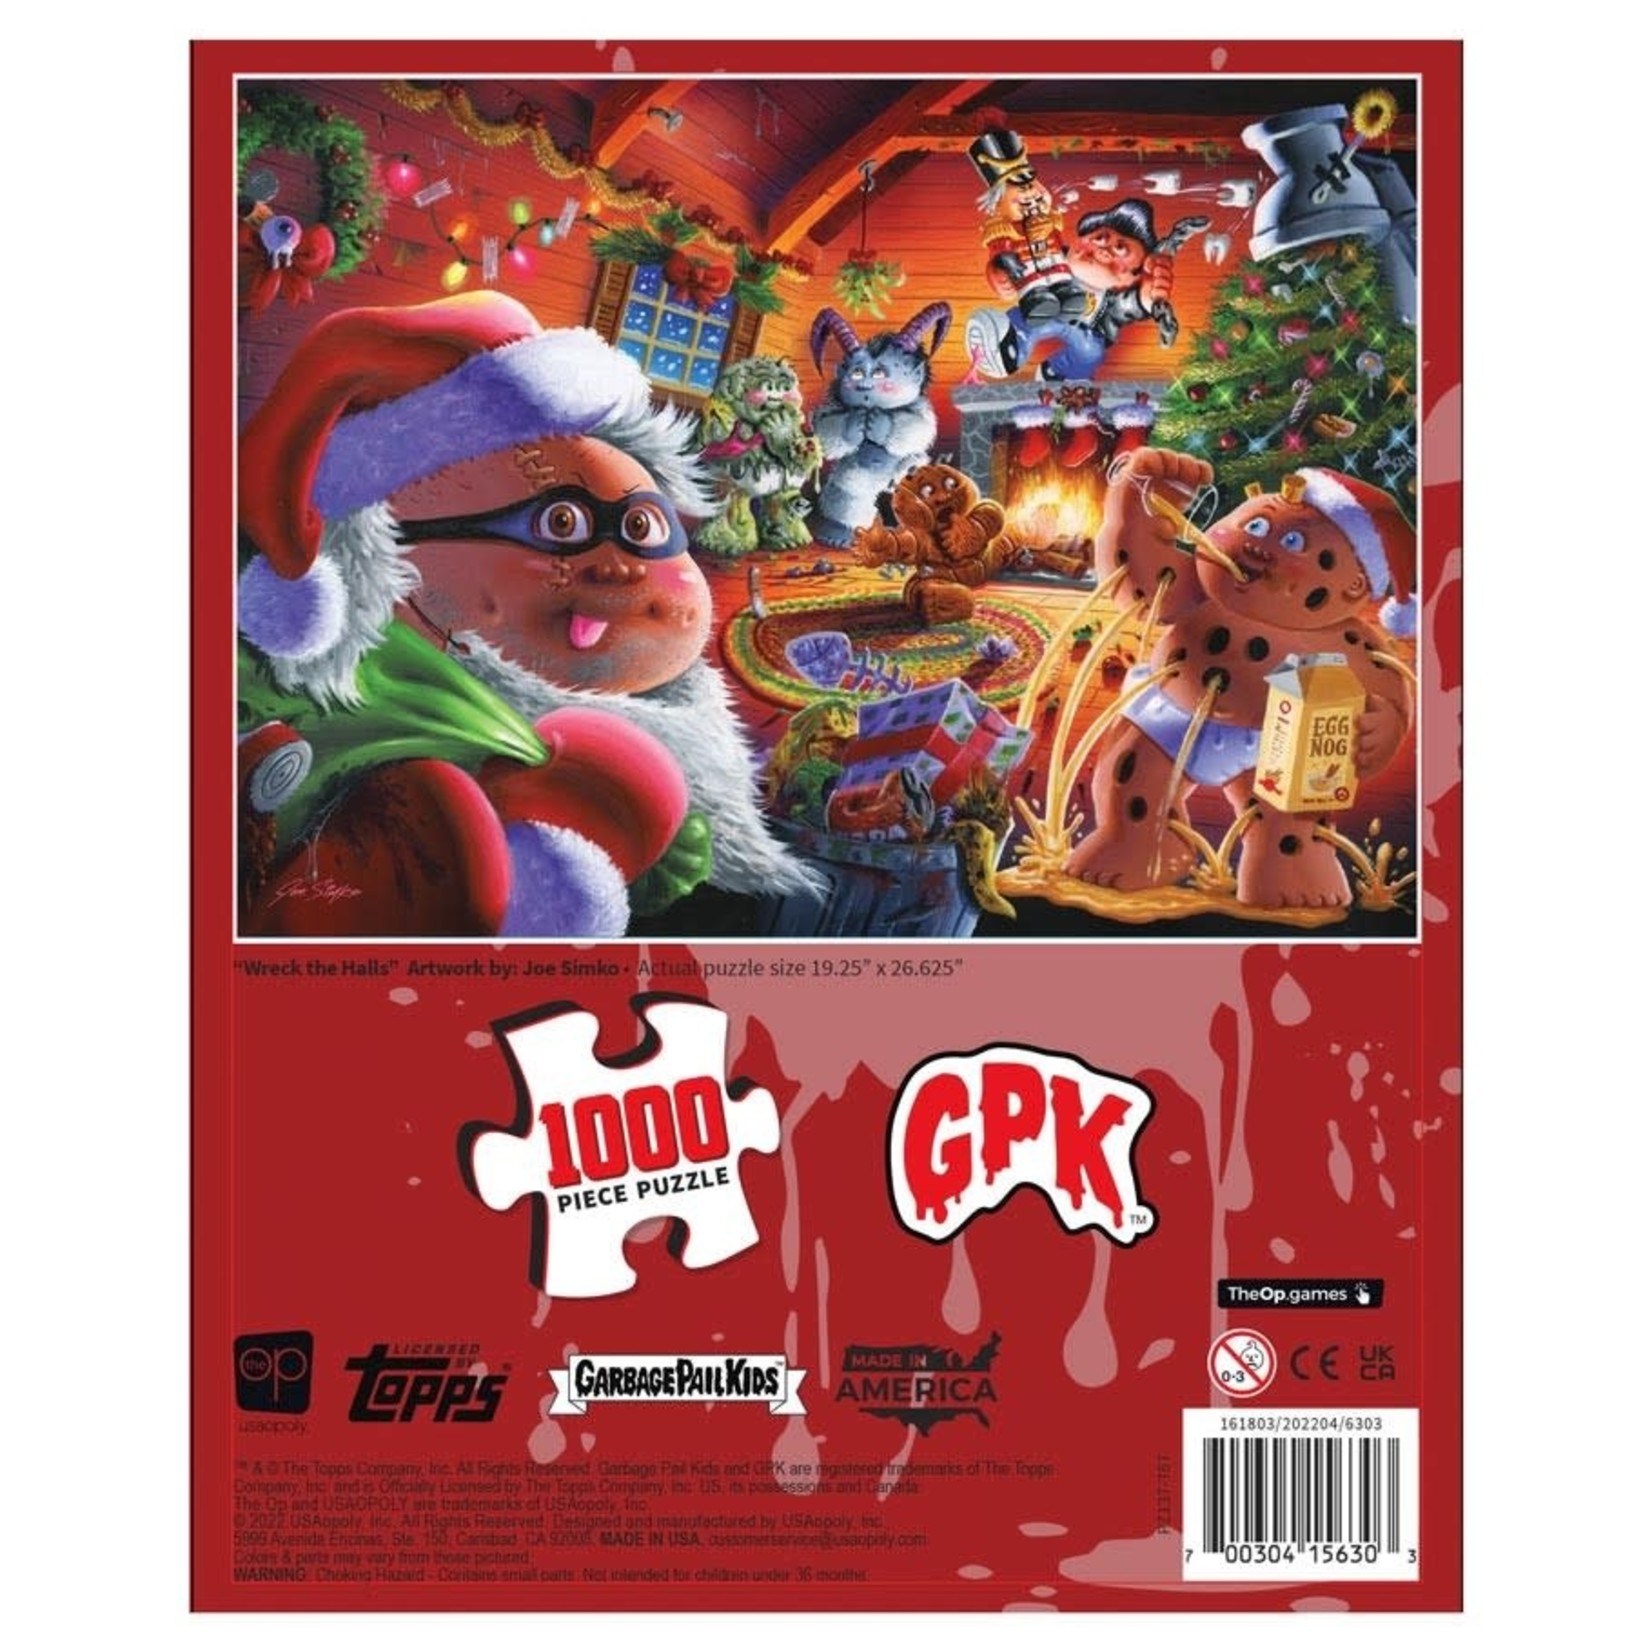 The OP-USAopoly Garbage Pail Kids 1000 piece Puzzle: Wreck the Halls